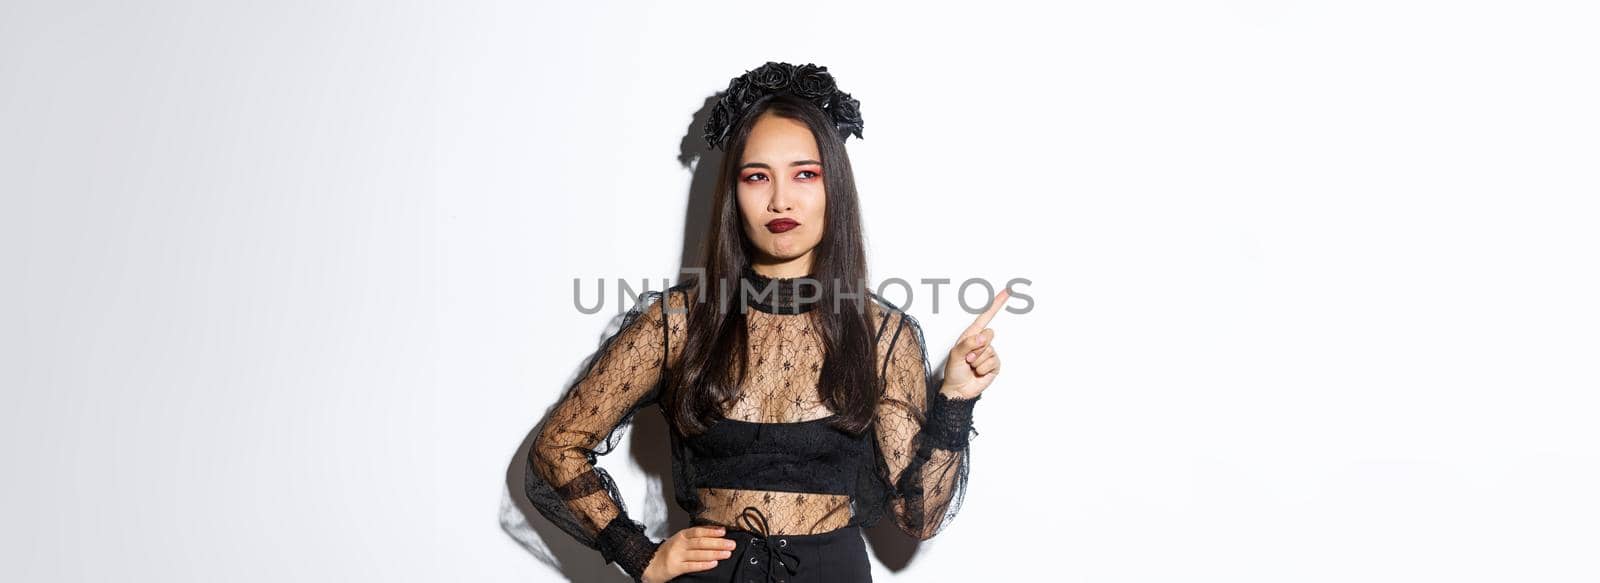 Unamused and skeptical asian beautiful woman in witch dress, looking at upper left corner with displeased smirk, standing over white background, showing logo or promo banner by Benzoix